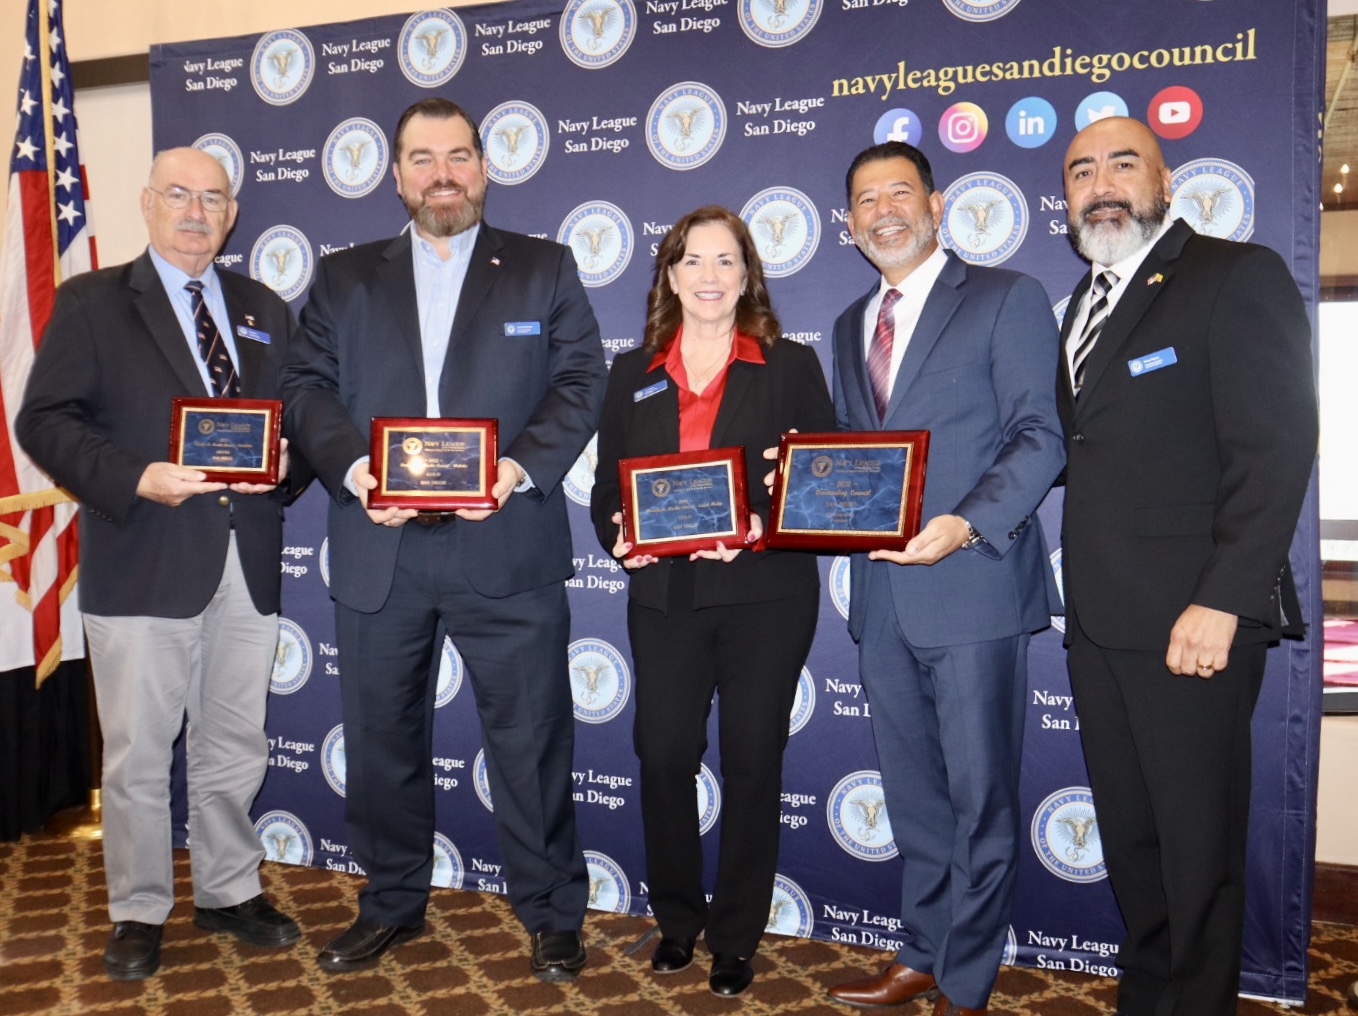 San Diego Council – 2023 Award Winners in recognizing and supporting its Maritime Forces in the San Diego metro area.